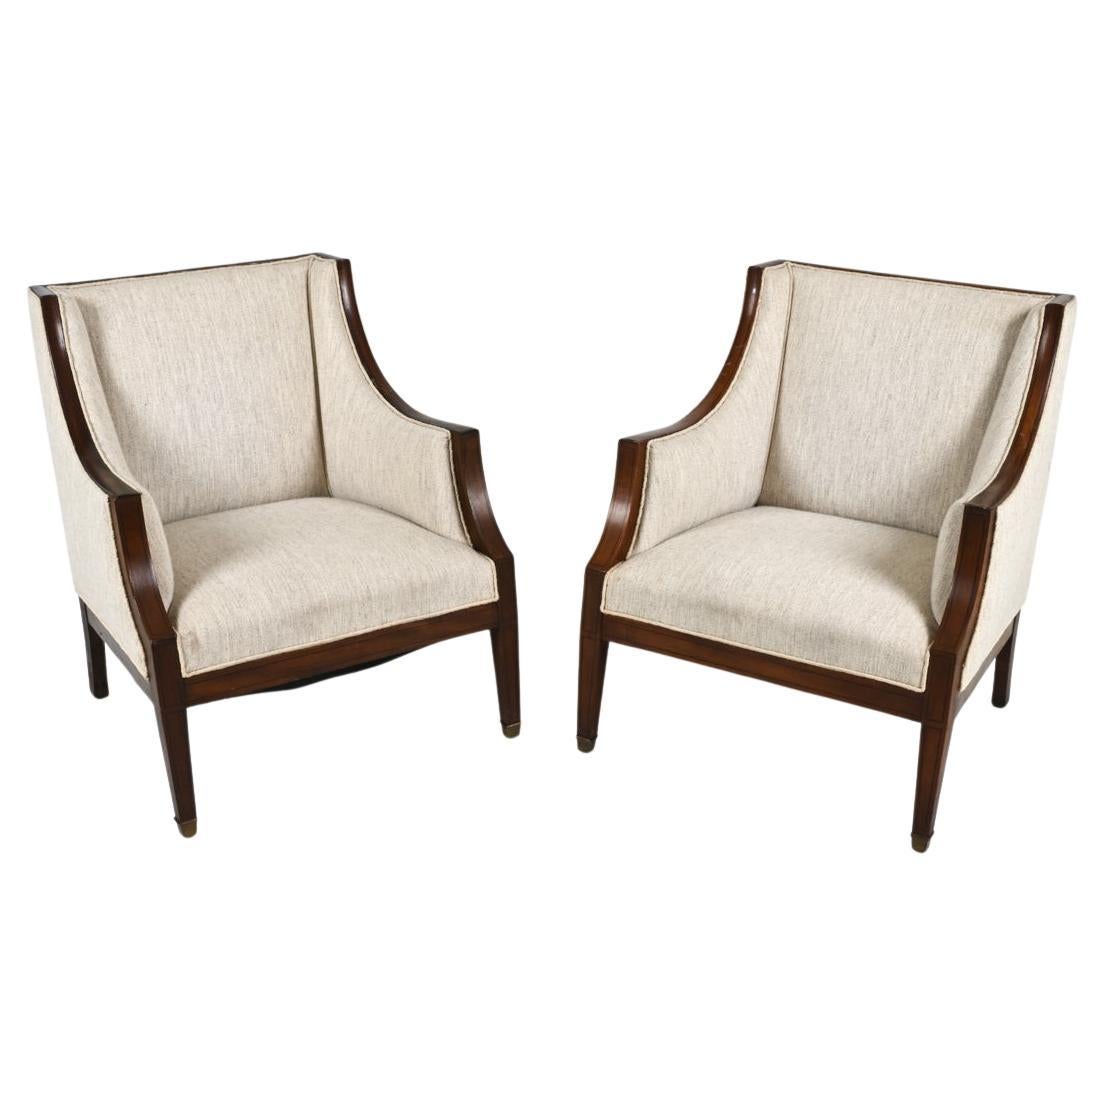 Pair of Scandinavian Mahogany & Wool Armchairs in the Style of Frits Henningsen